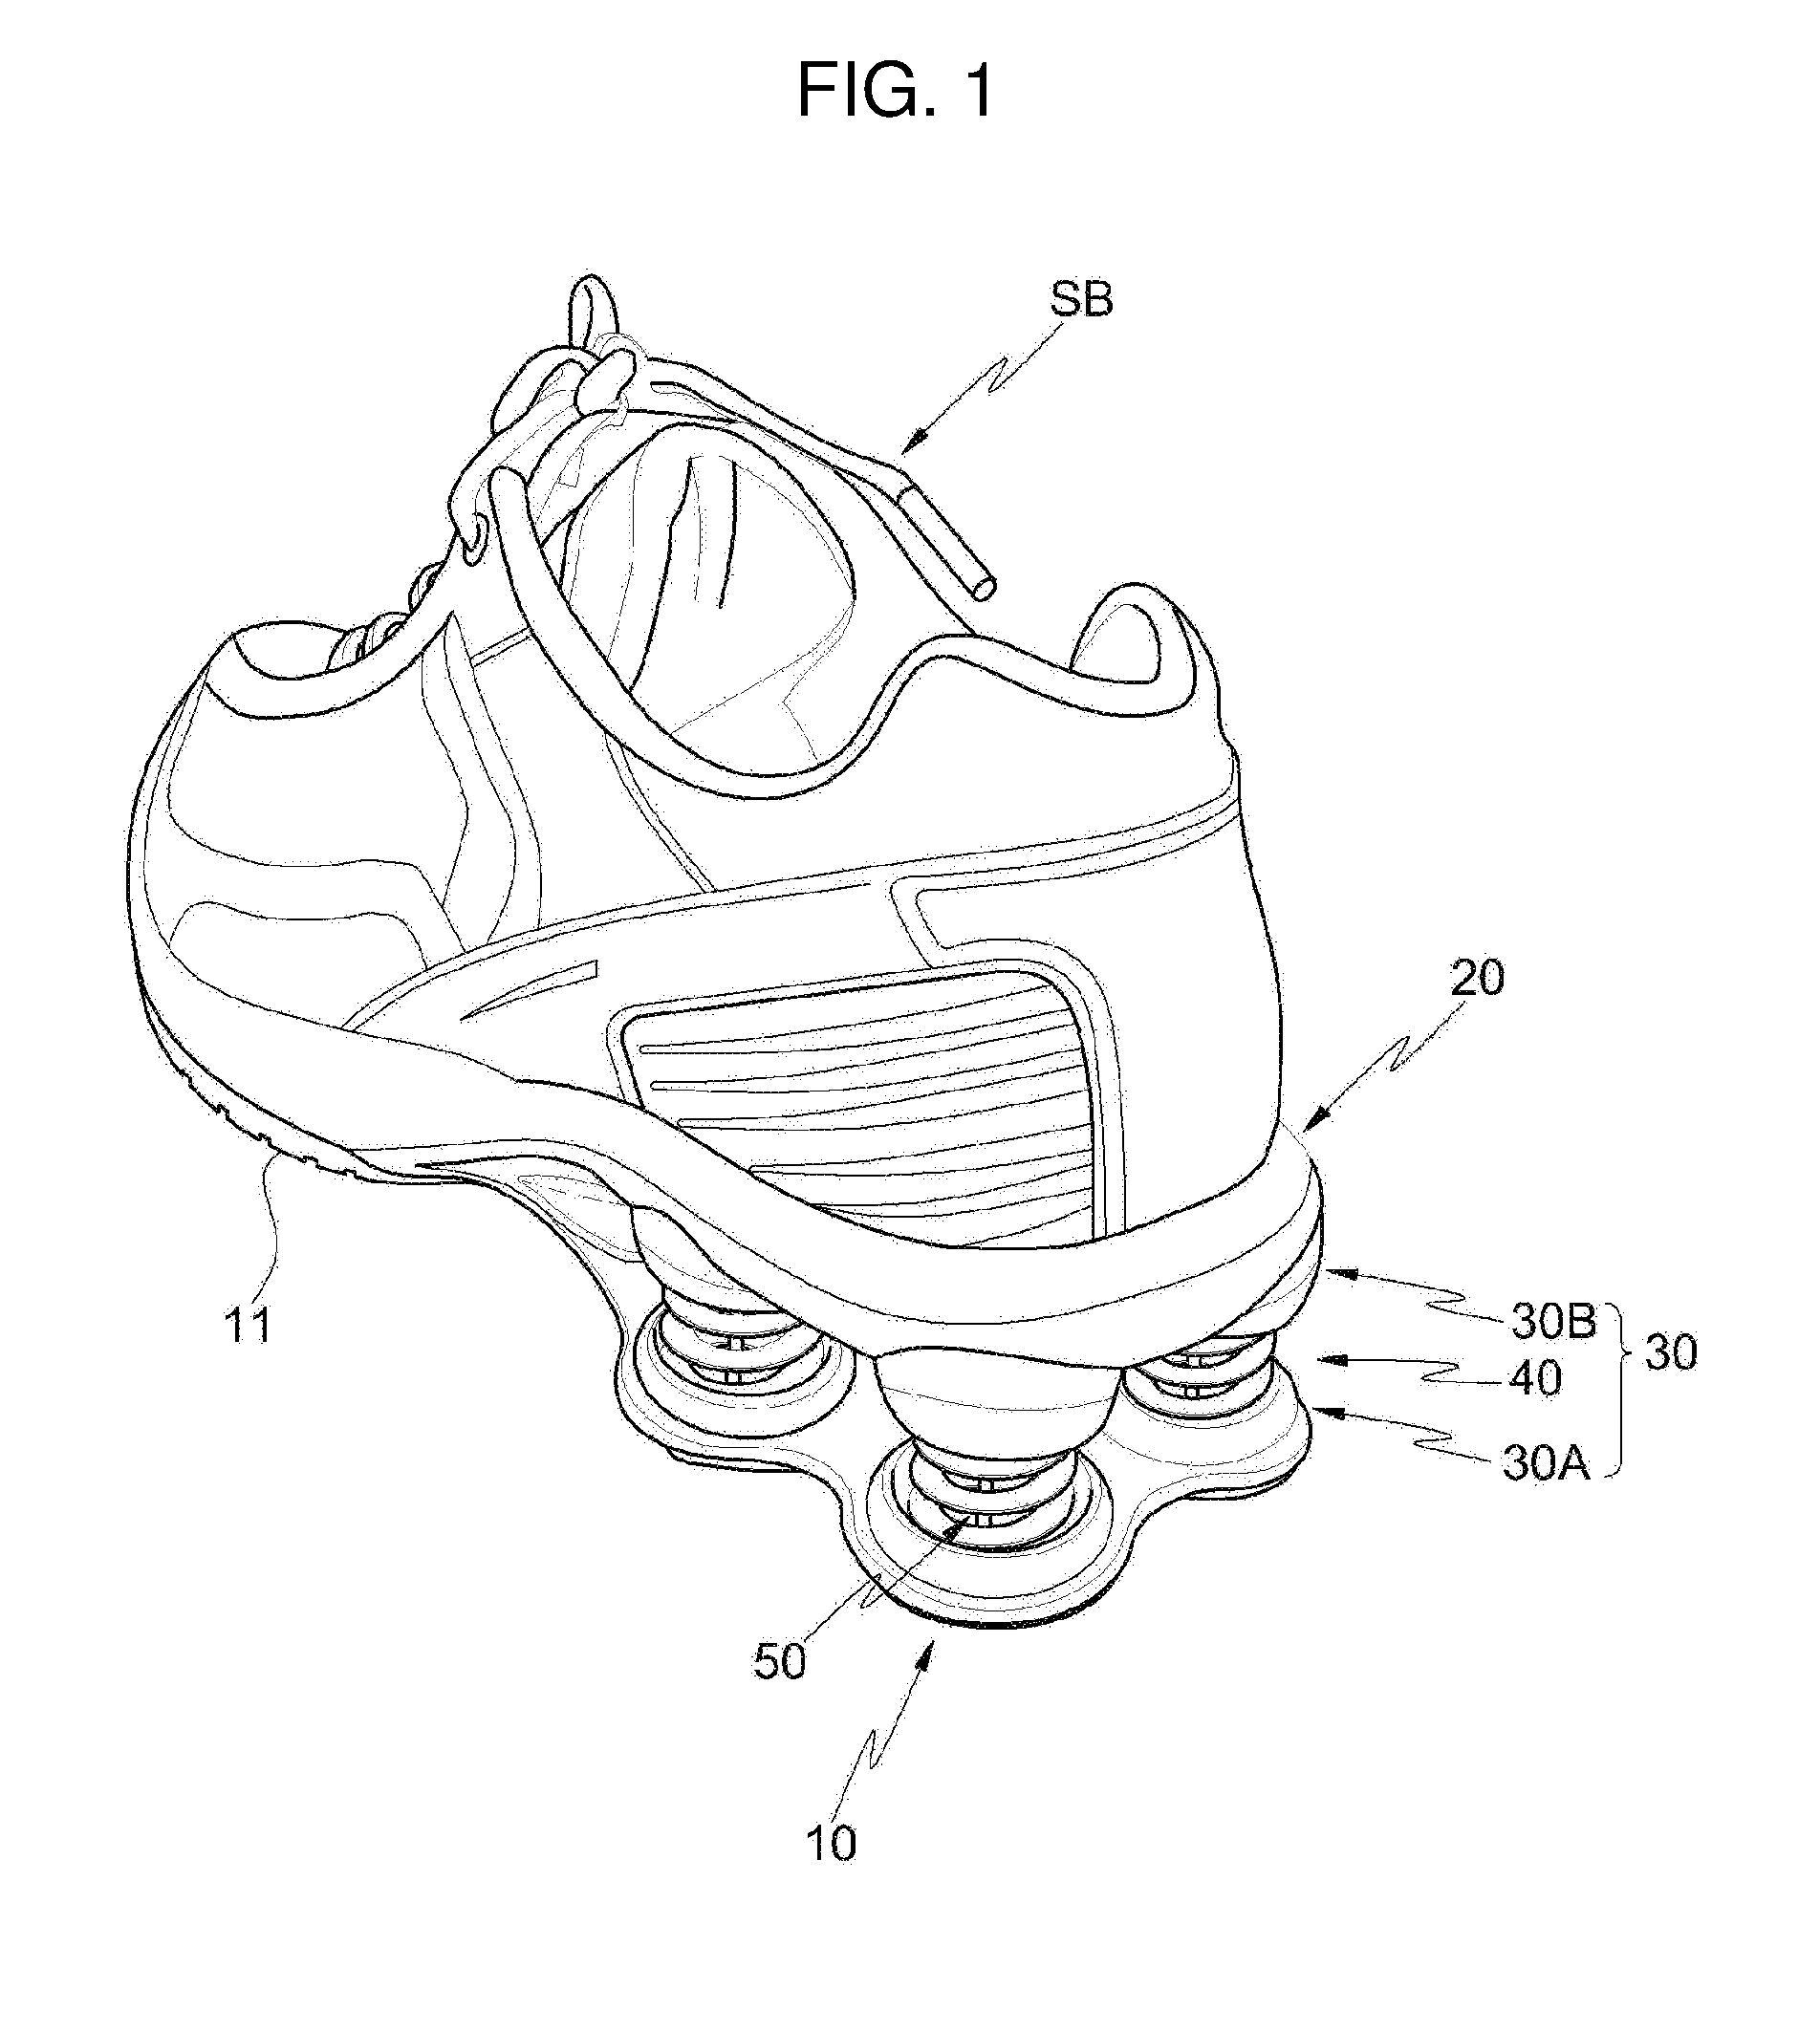 Shock absorbing shoes with improved assembly and operational performance